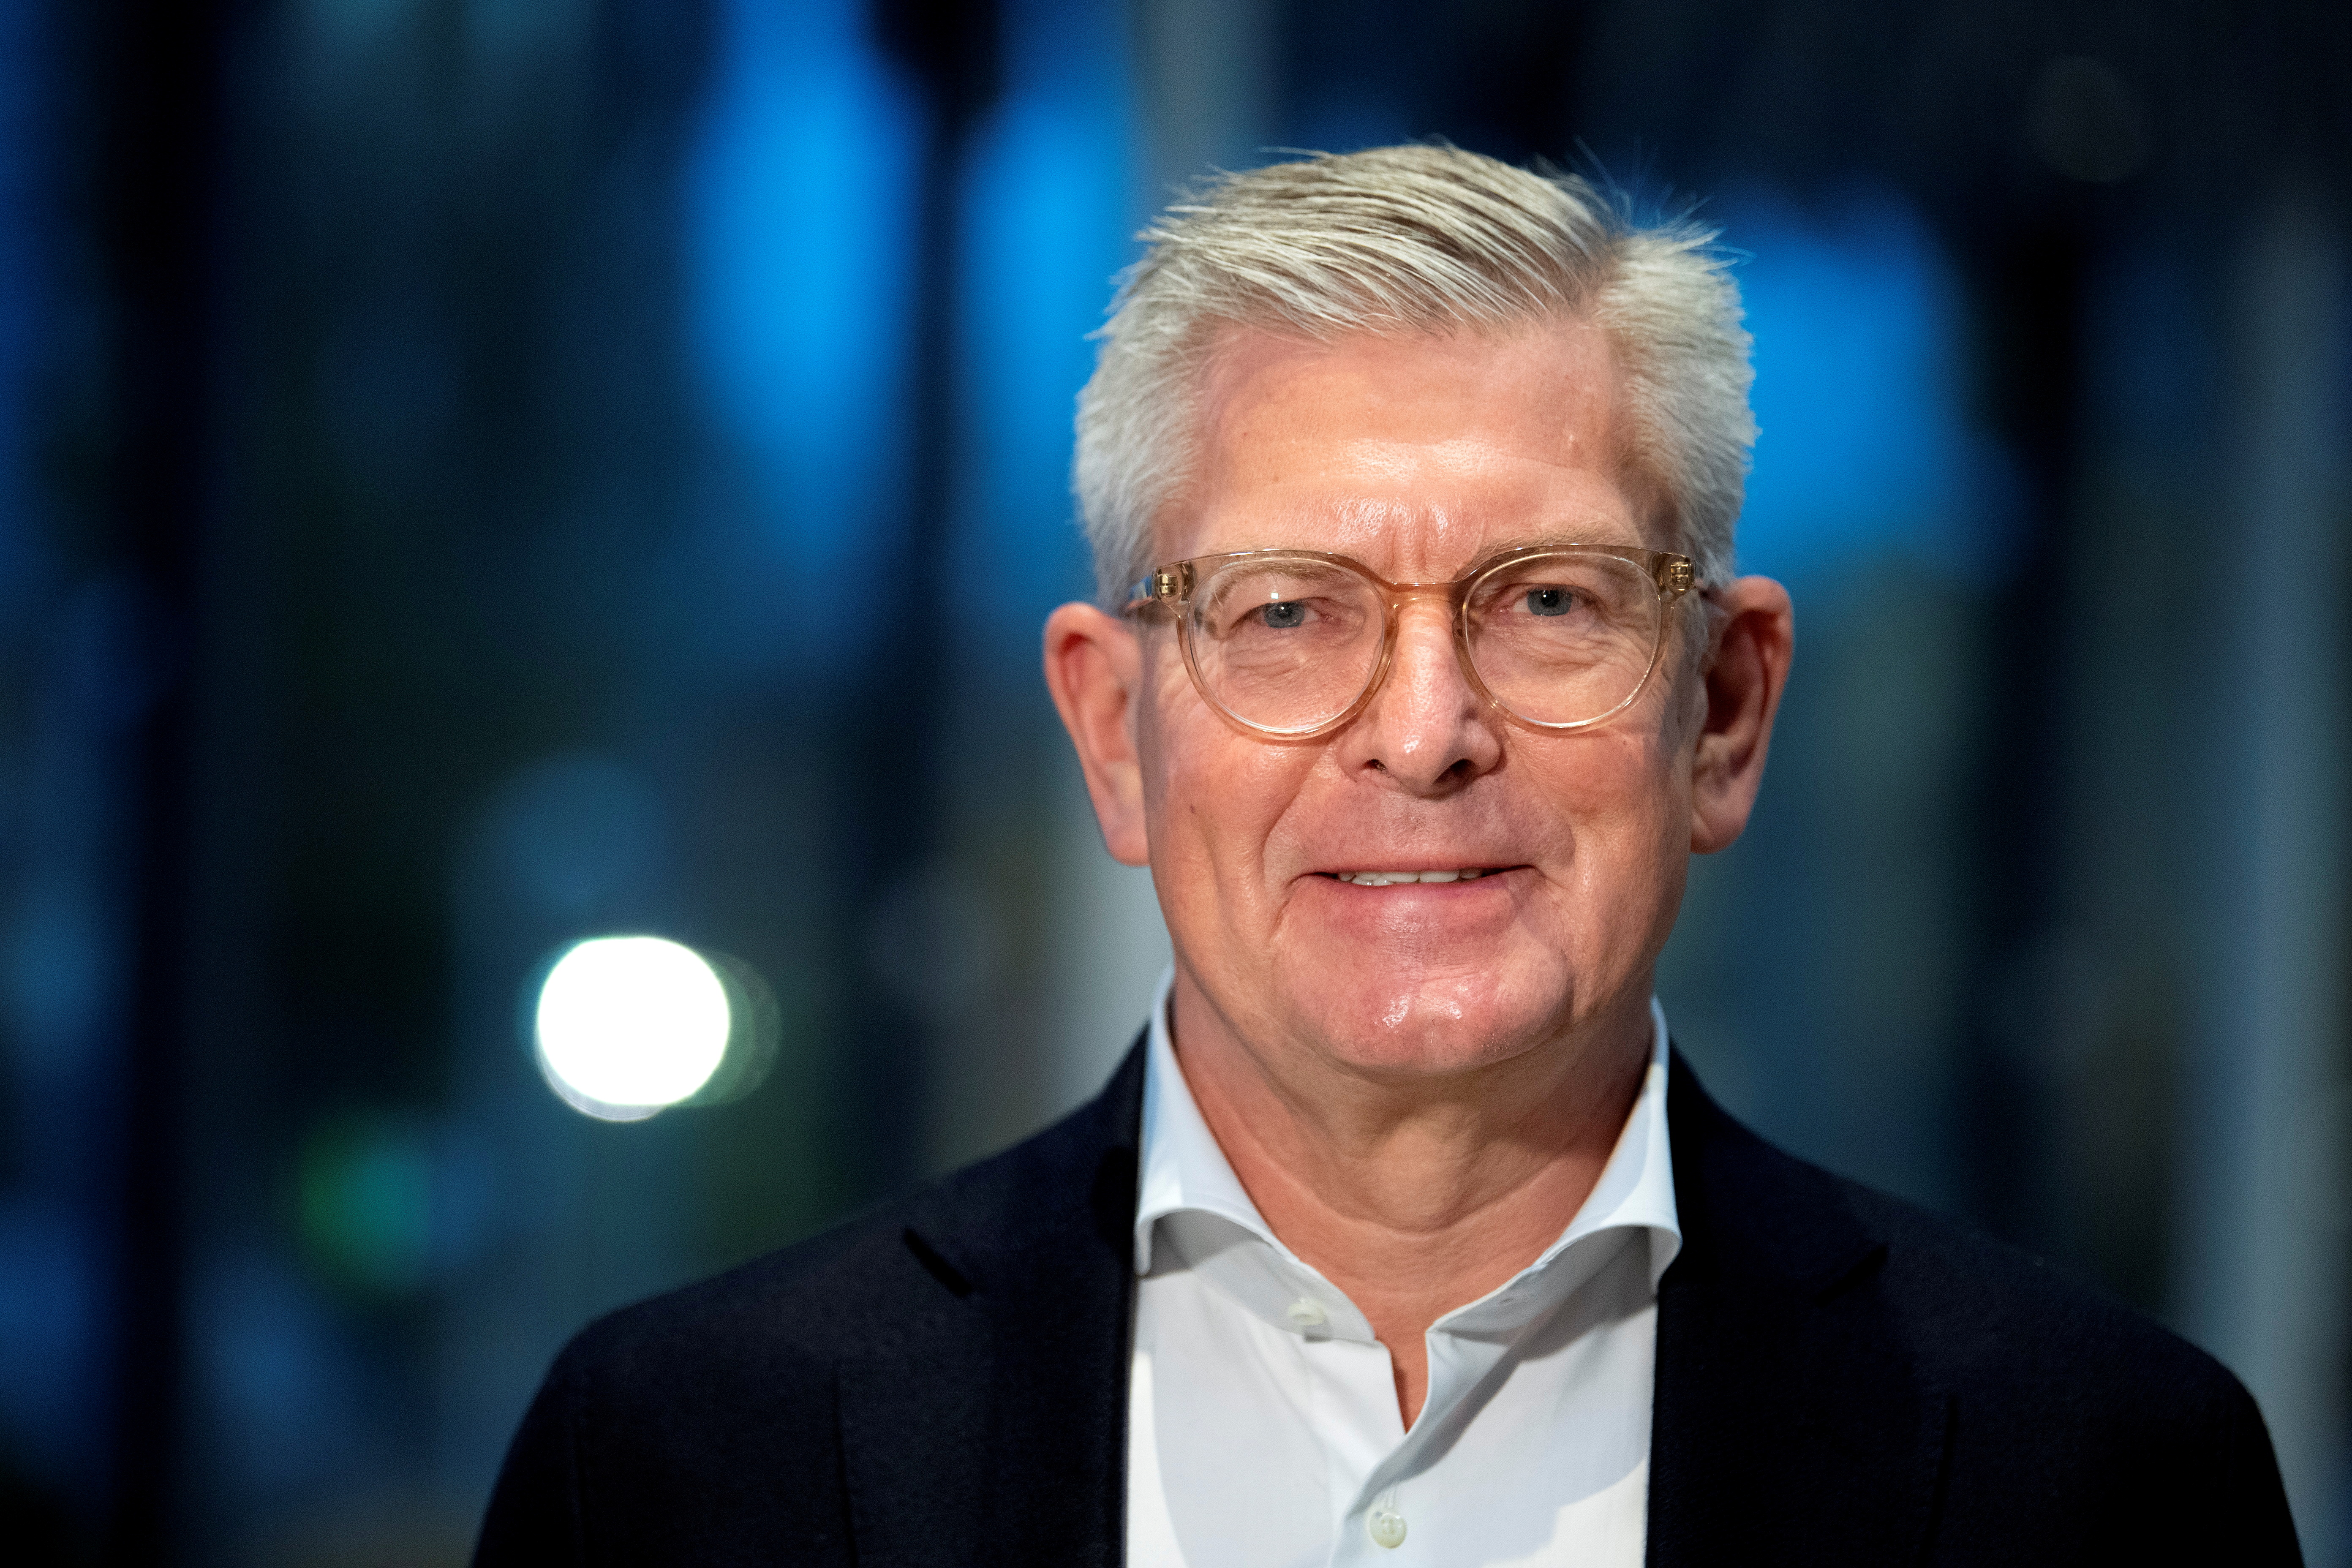 Ericsson's CEO Borje Ekholm during an interview at the company headquarters in Kista, Stockholm